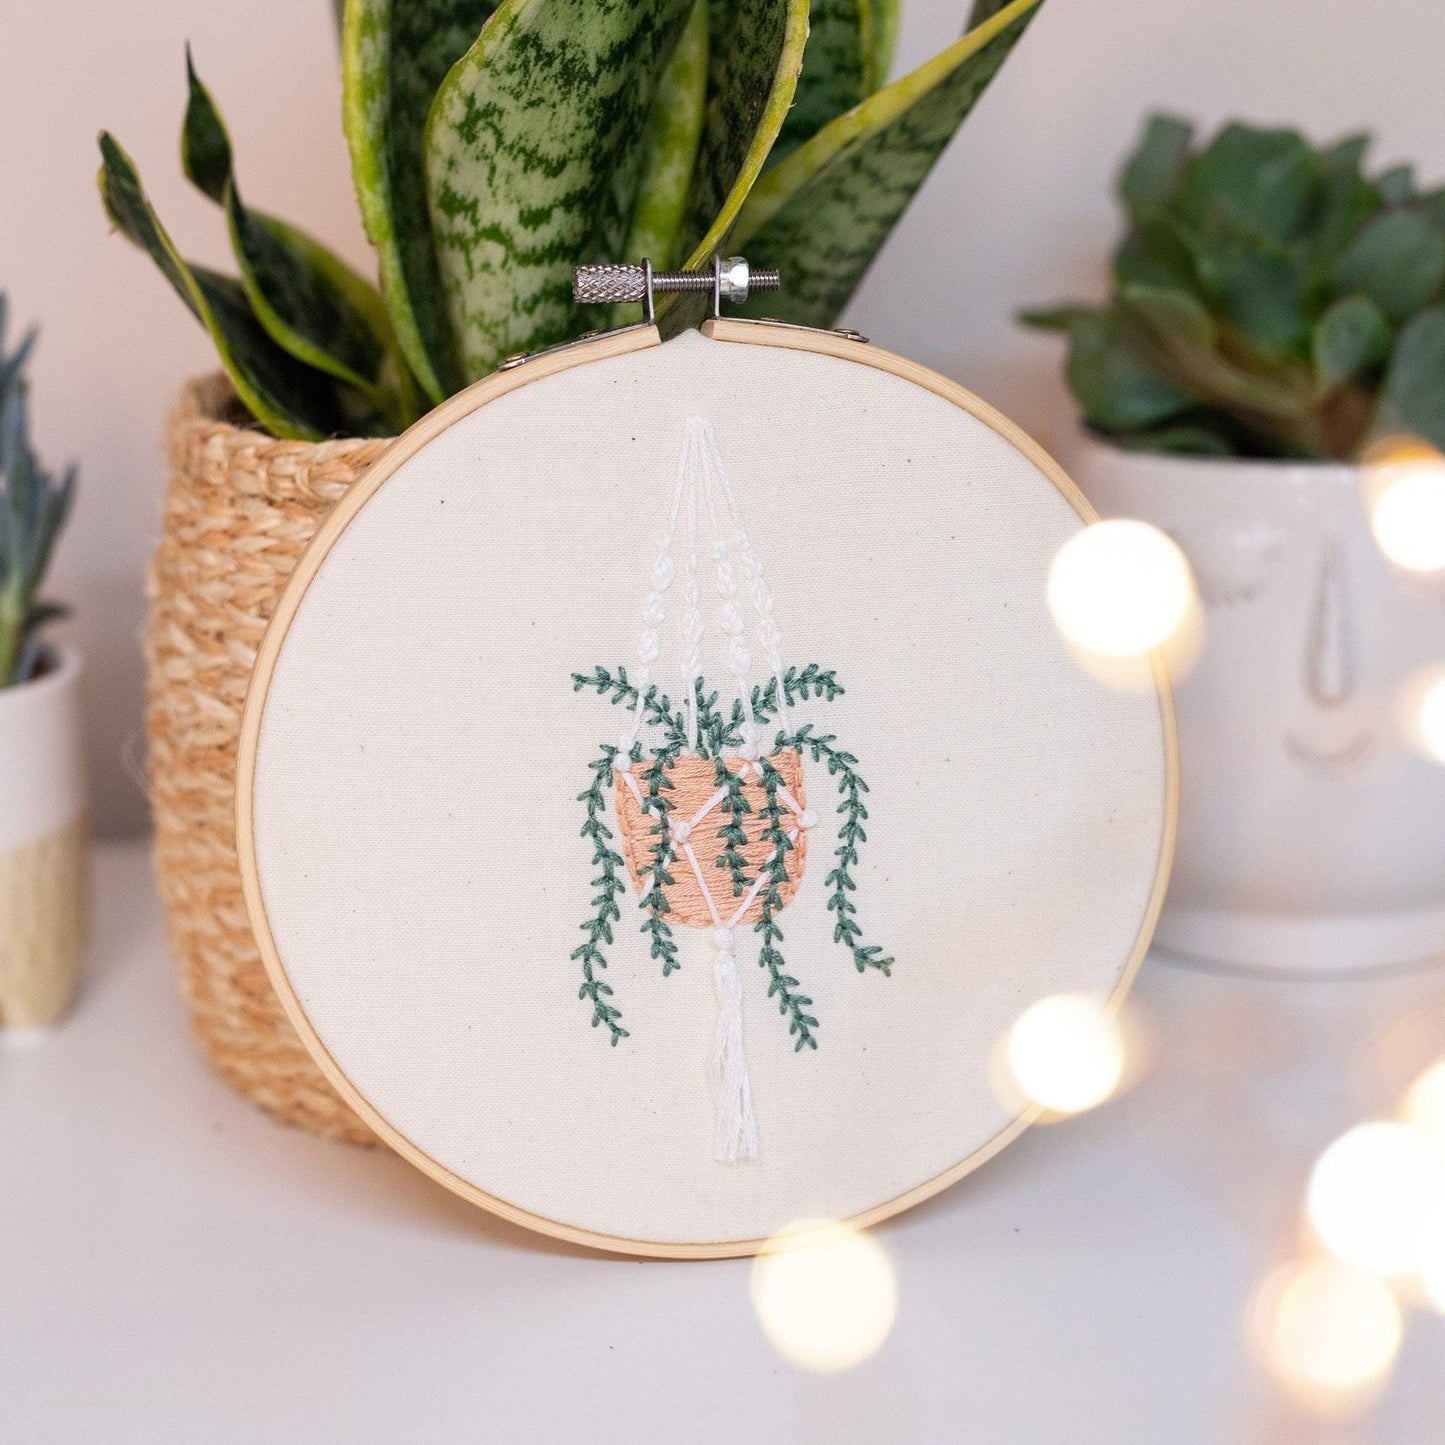 Hanging Plant Embroidery Hoop